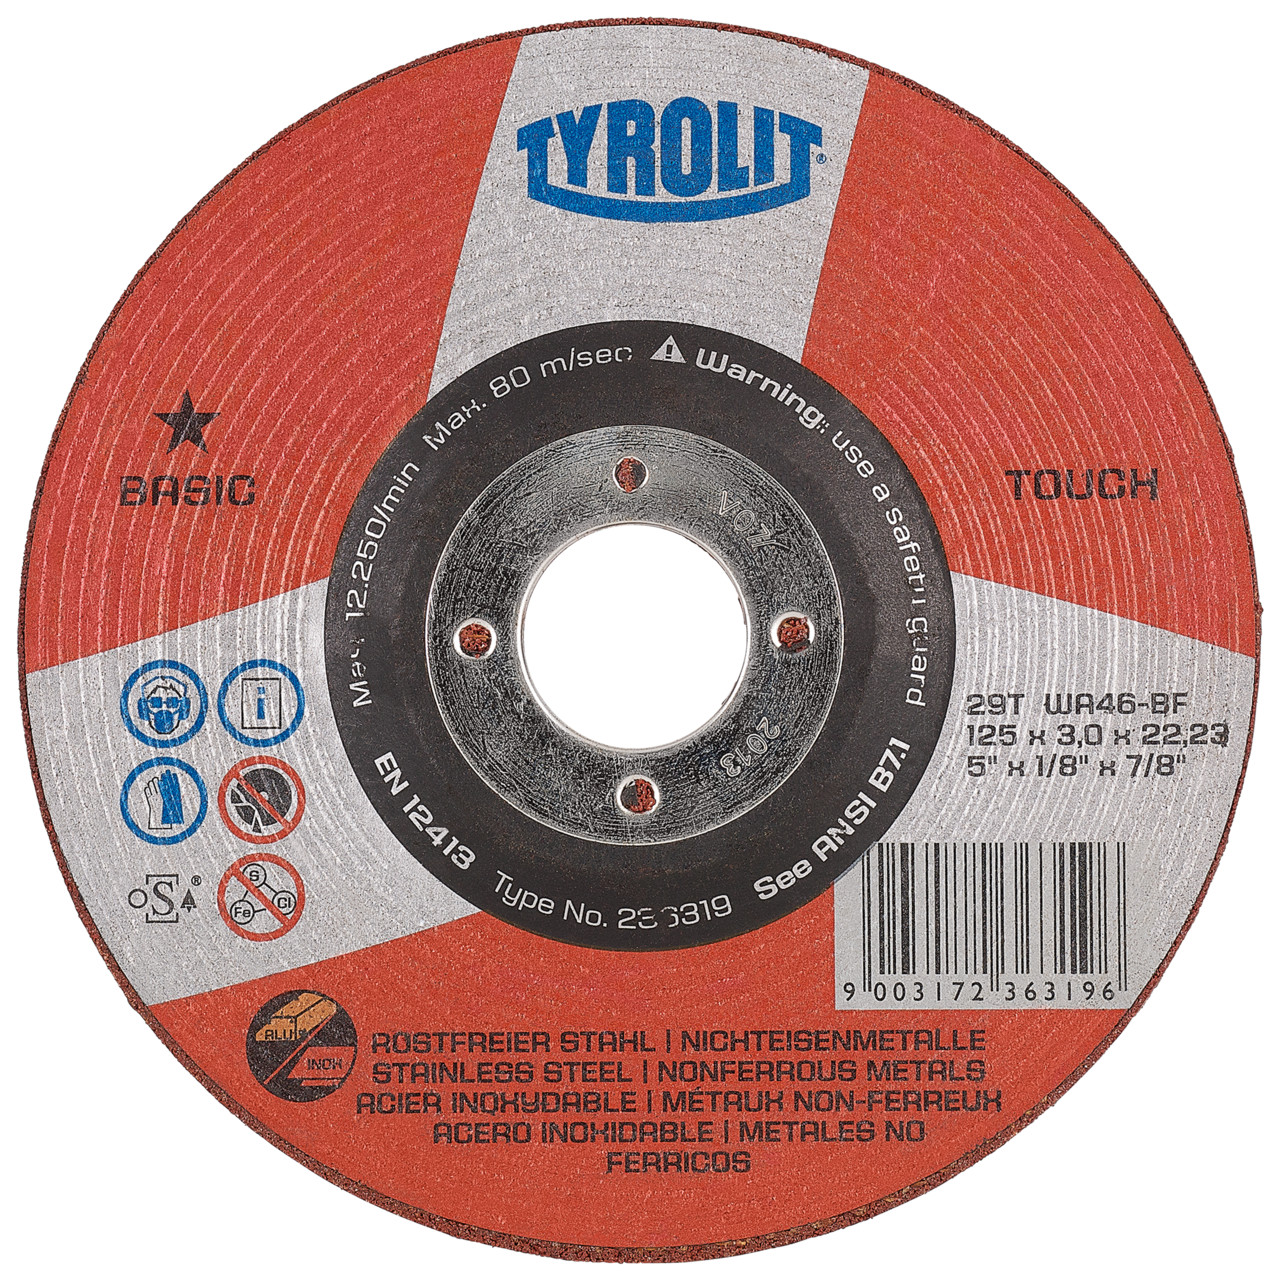 Tyrolit Grinding disc DxH 115x22.23 TOUCH for stainless steel and non-ferrous metals, shape: 29T - offset version, Art. 236318